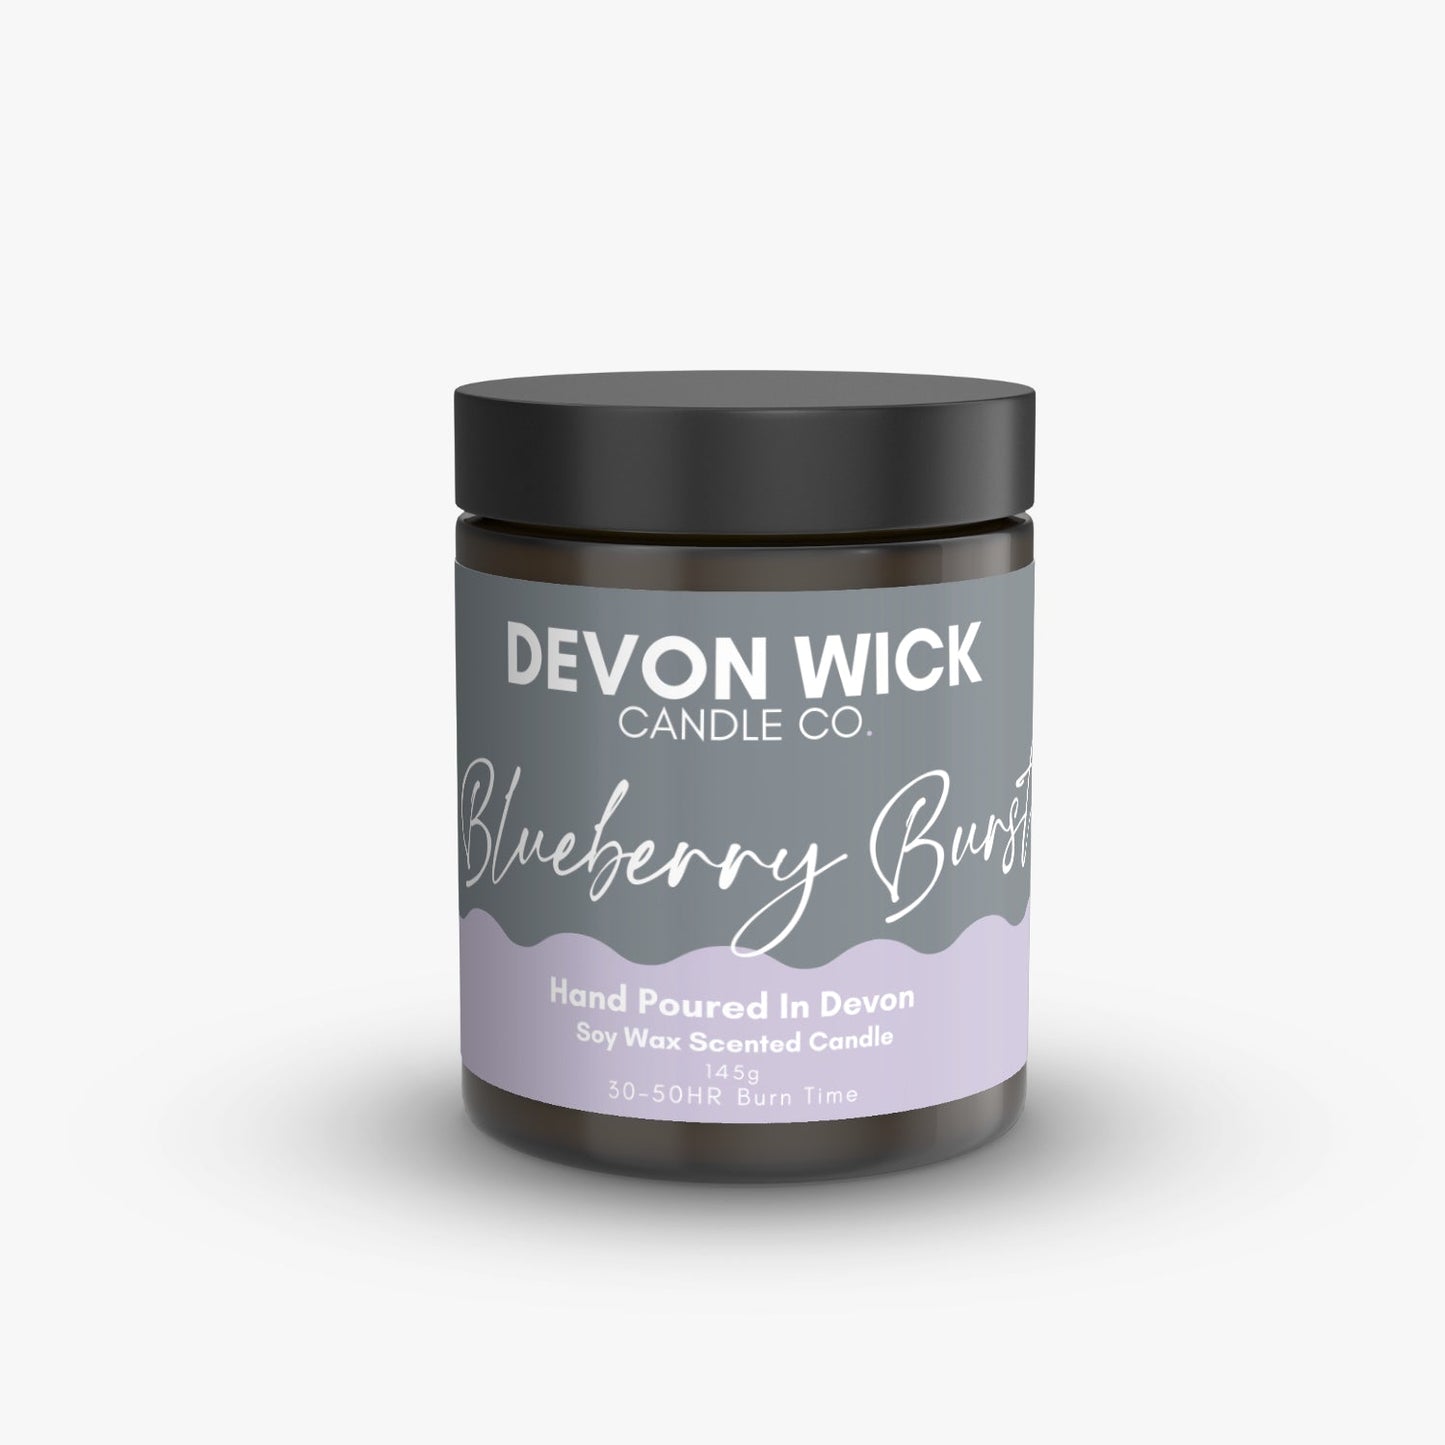 Devon Wick Candle Co. Limited Blueberry Burst Soy Wax Candle